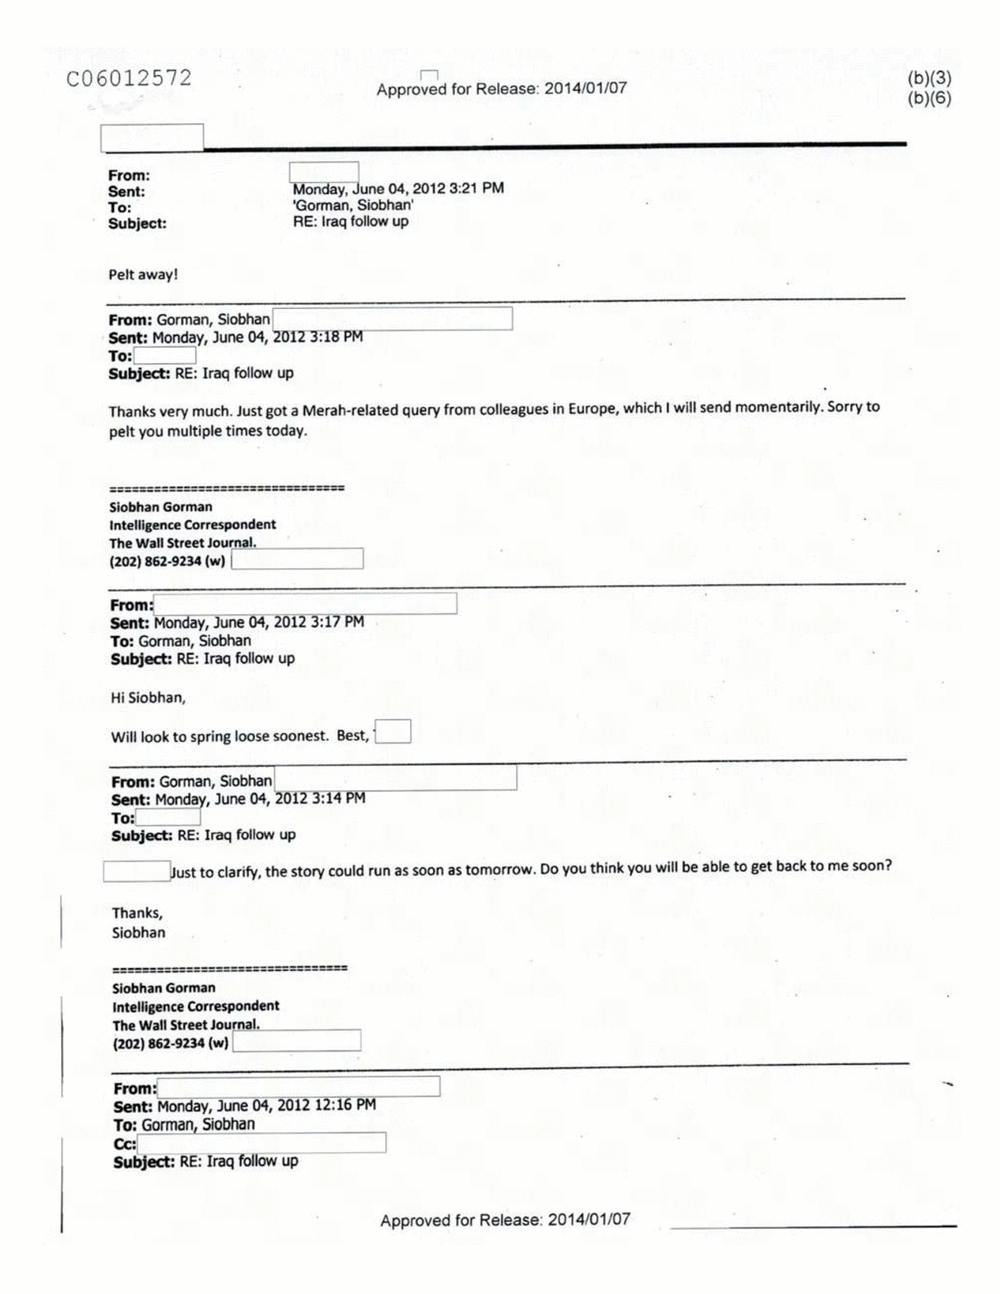 Page 106 from Email Correspondence Between Reporters and CIA Flacks